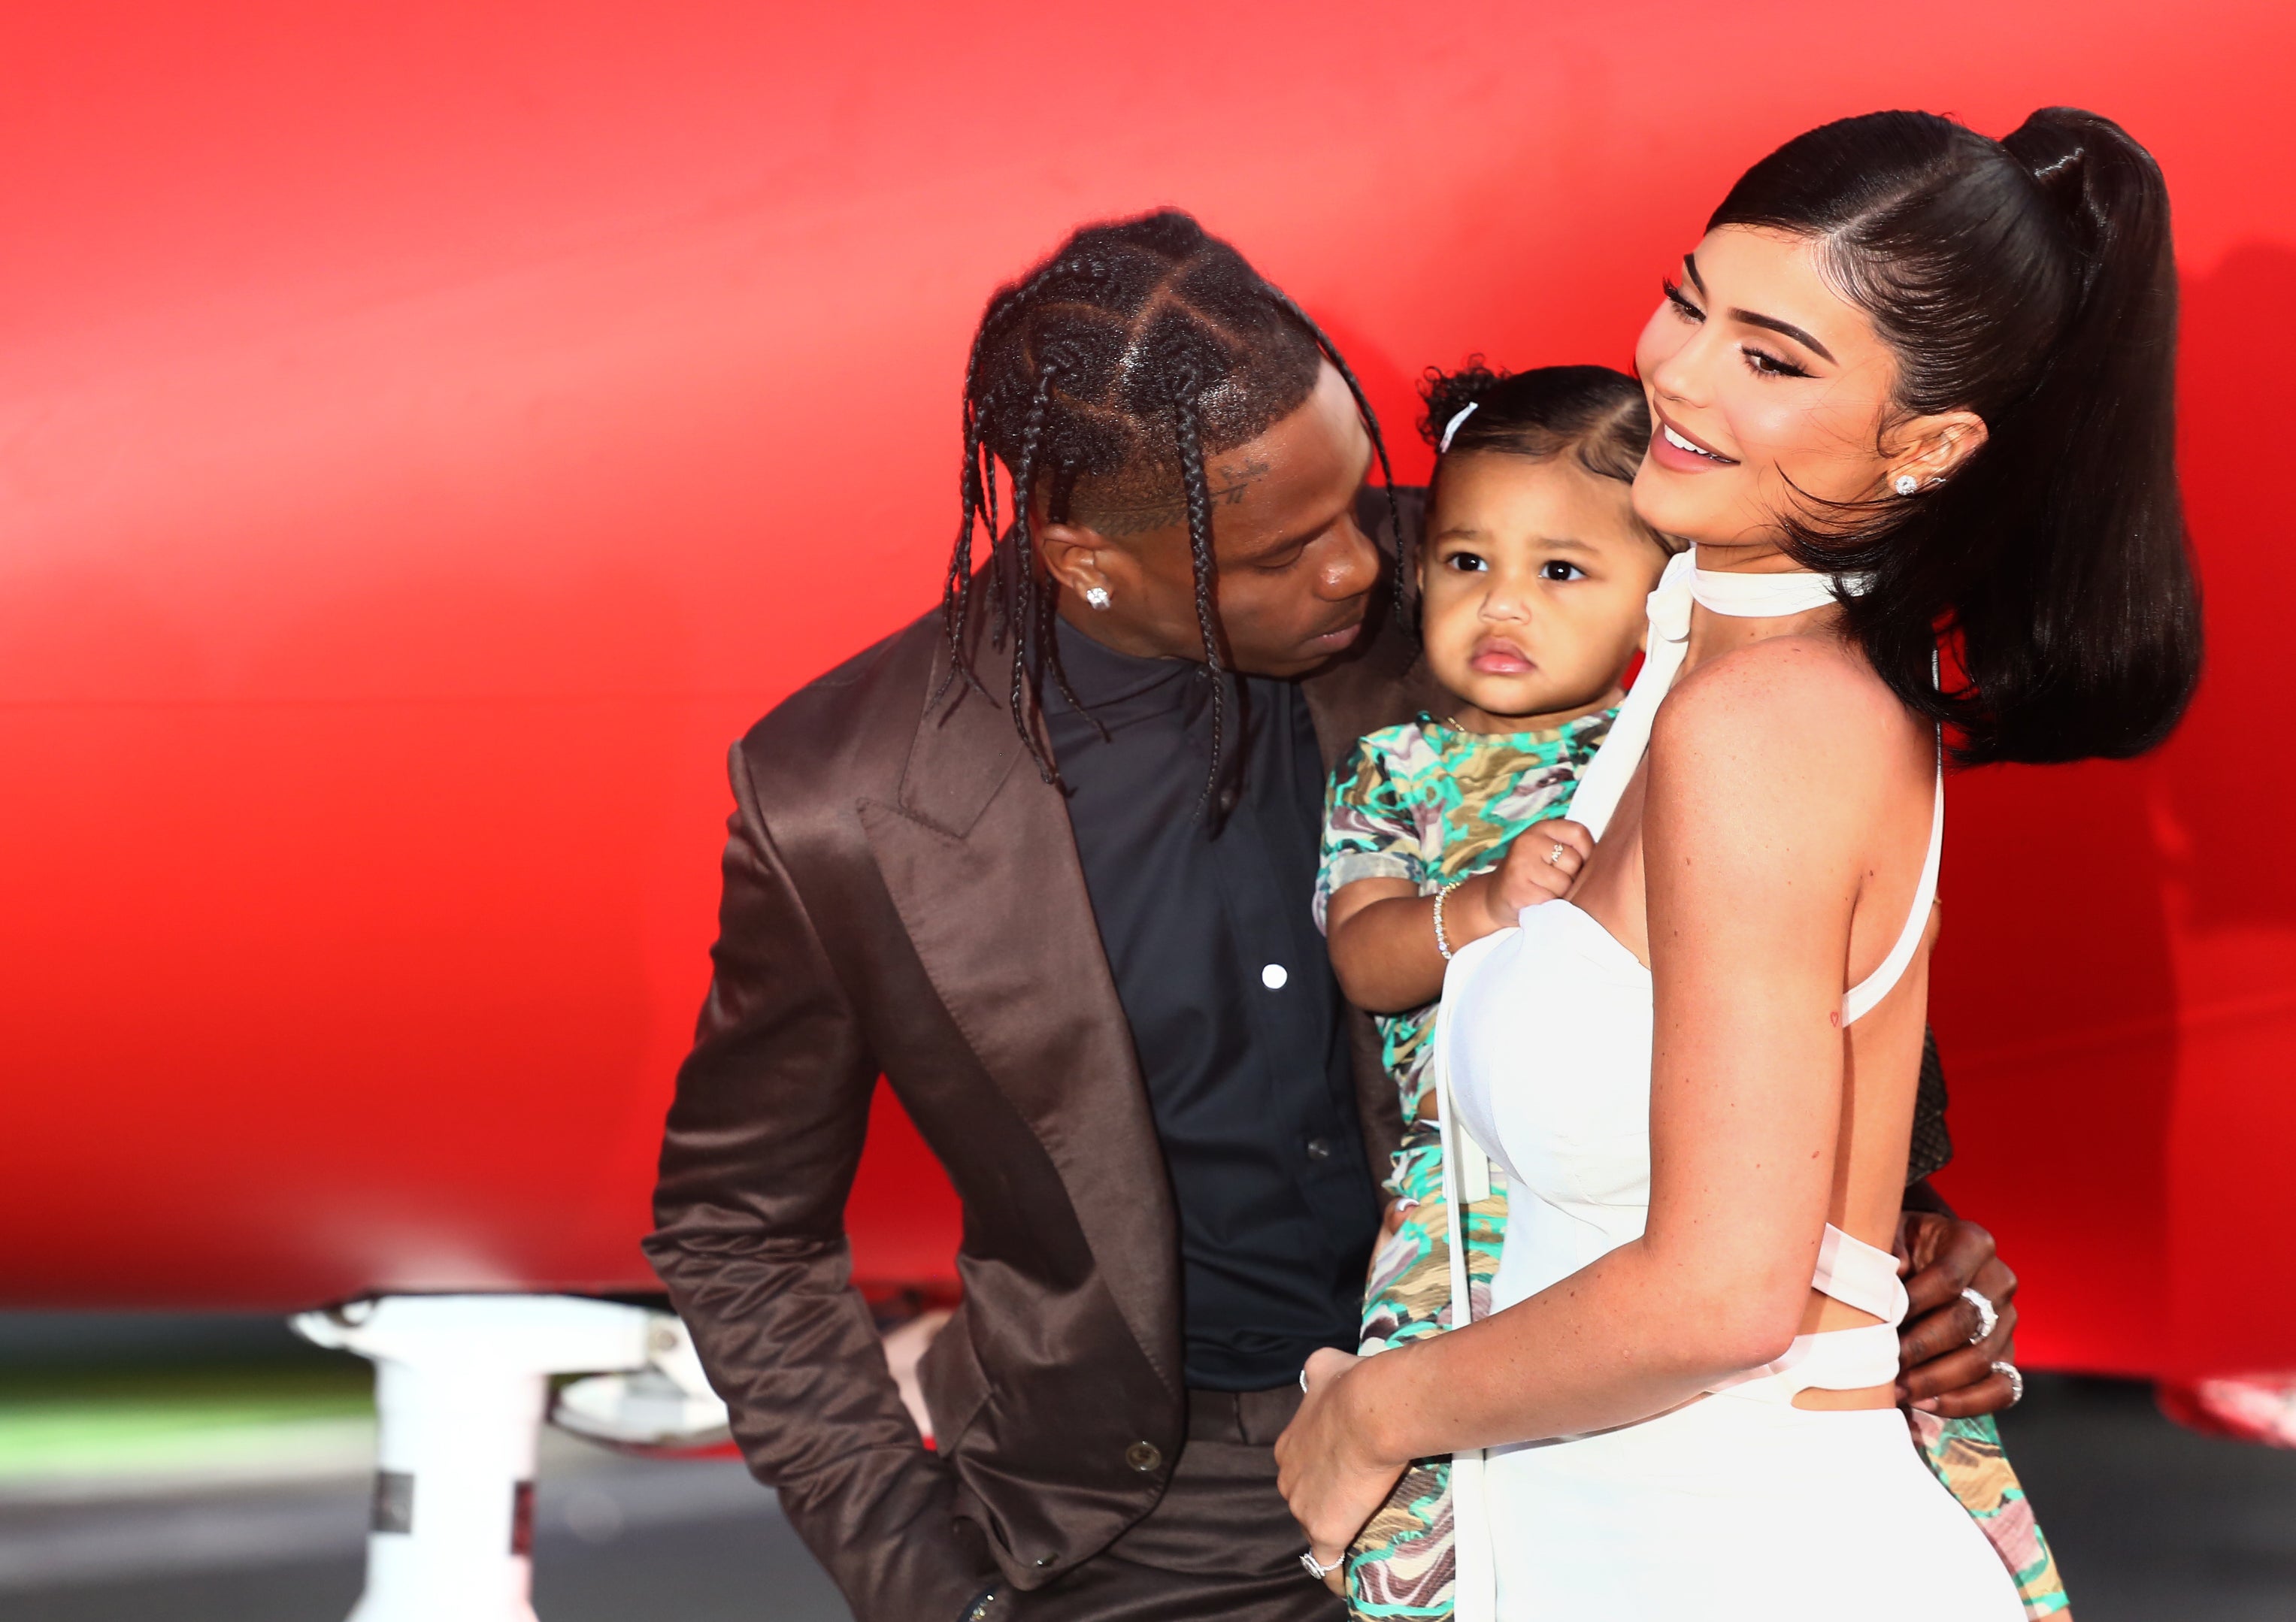 Kylie Jenner and Travis Scott with their first child, daughter Stormi